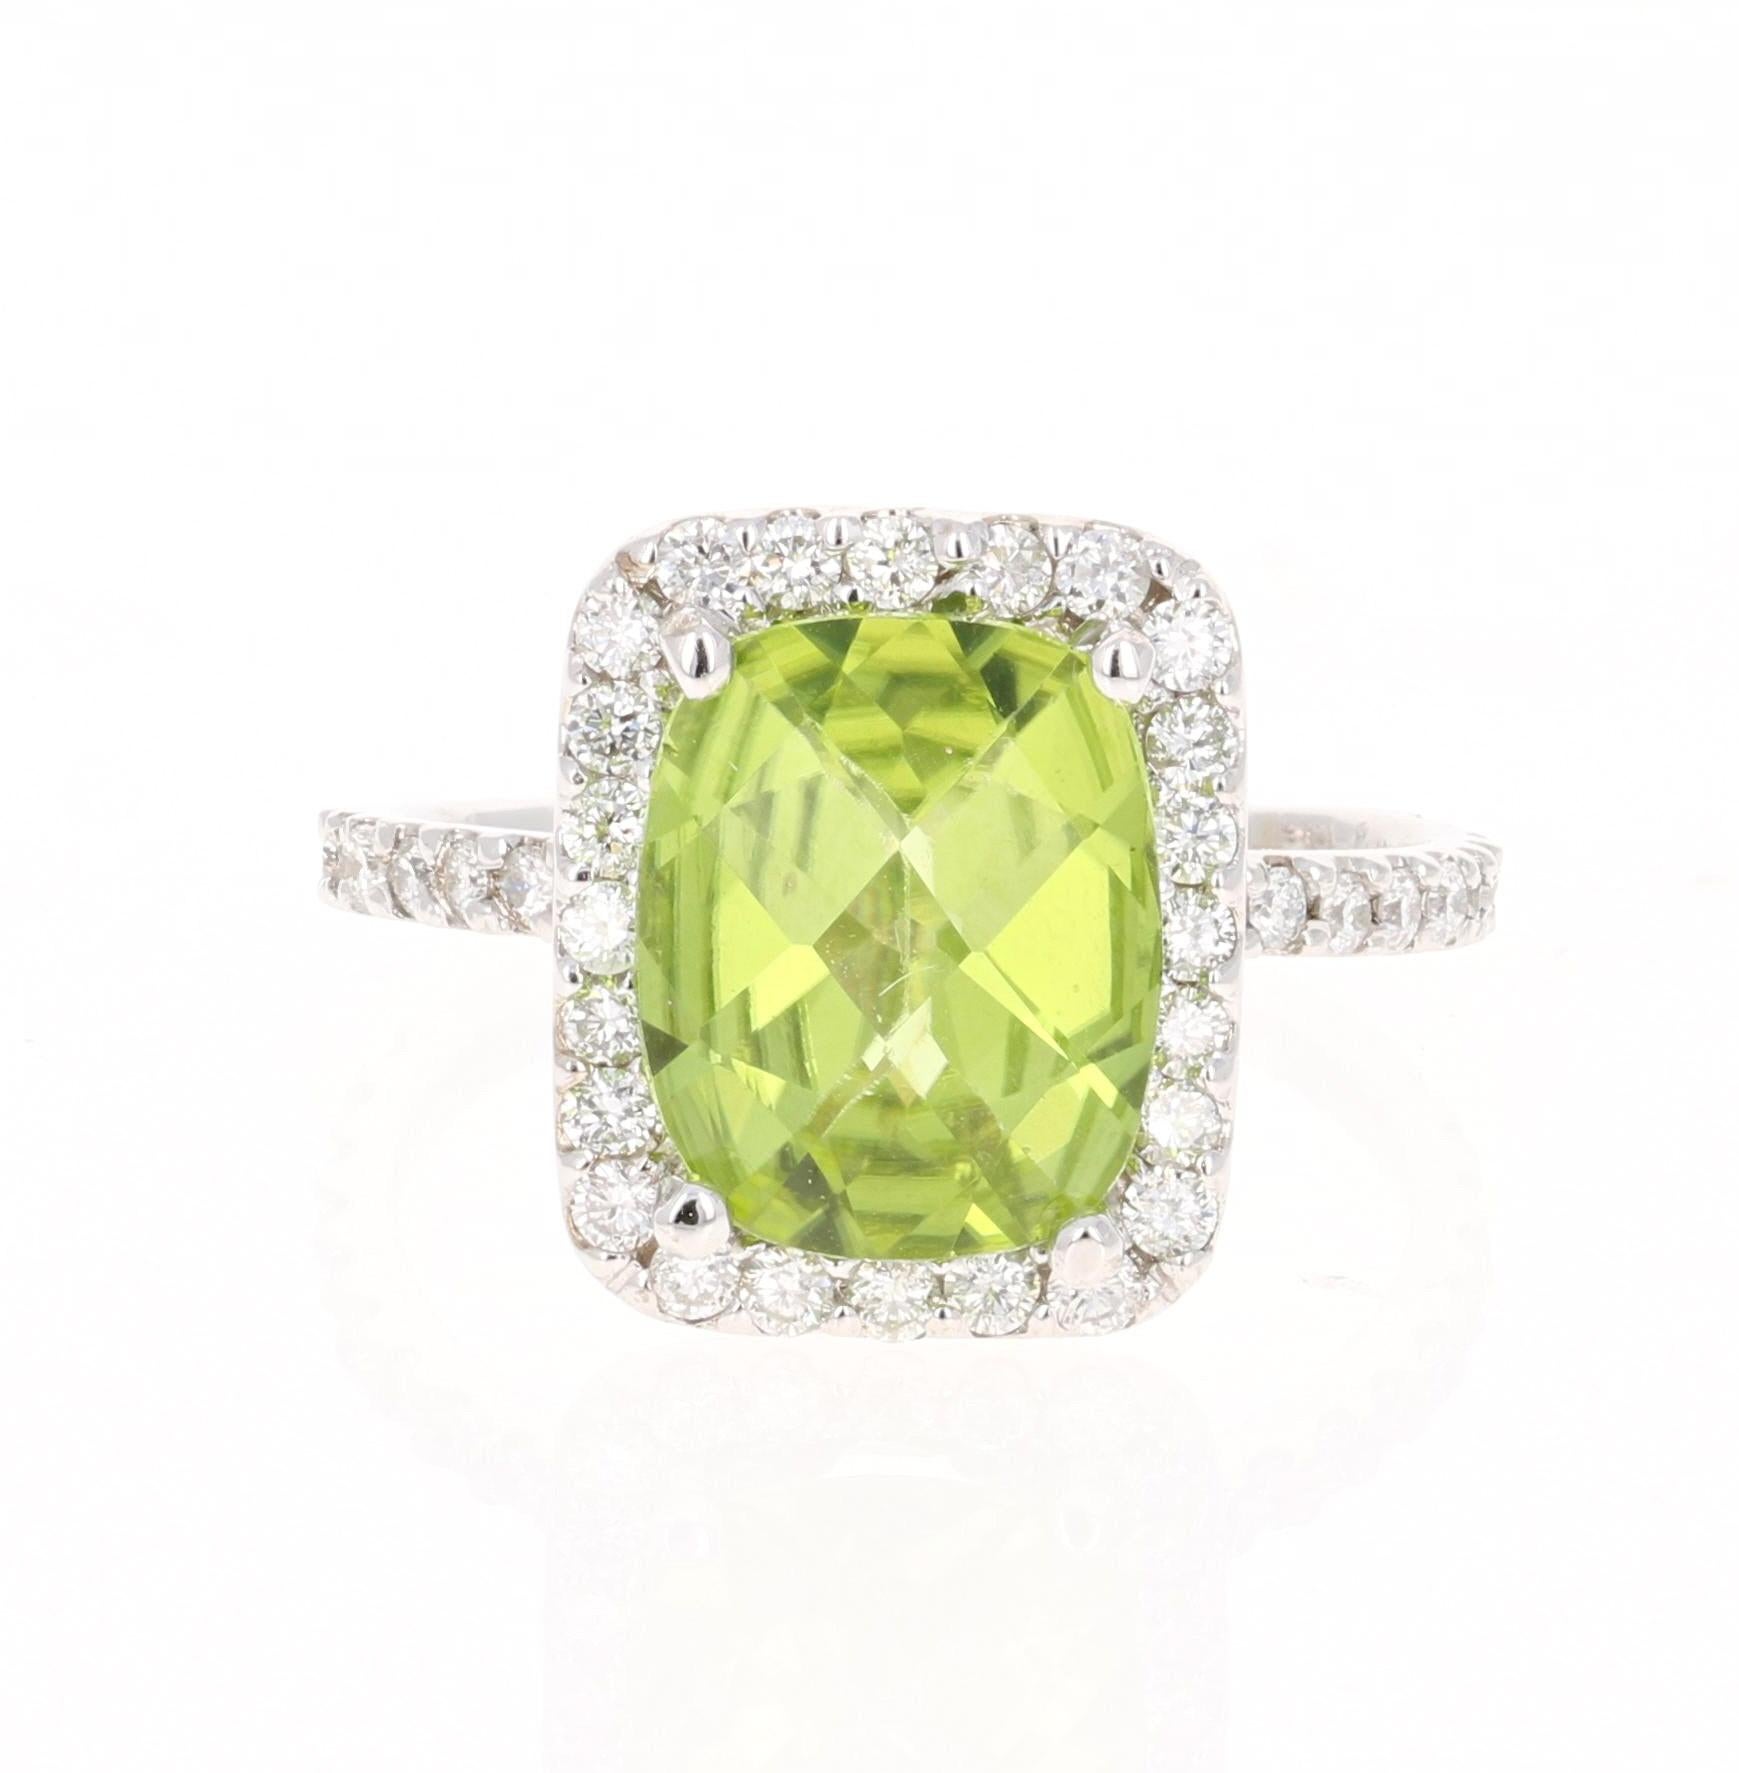 3.89 Carat Peridot Diamond Engagement White Gold Ring - this can be a stunning and unique alternative to an engagement ring!

This beautiful ring has a Oval/Cushion Cut Peridot in the center that weighs 3.25 Carats. The ring is surrounded by a